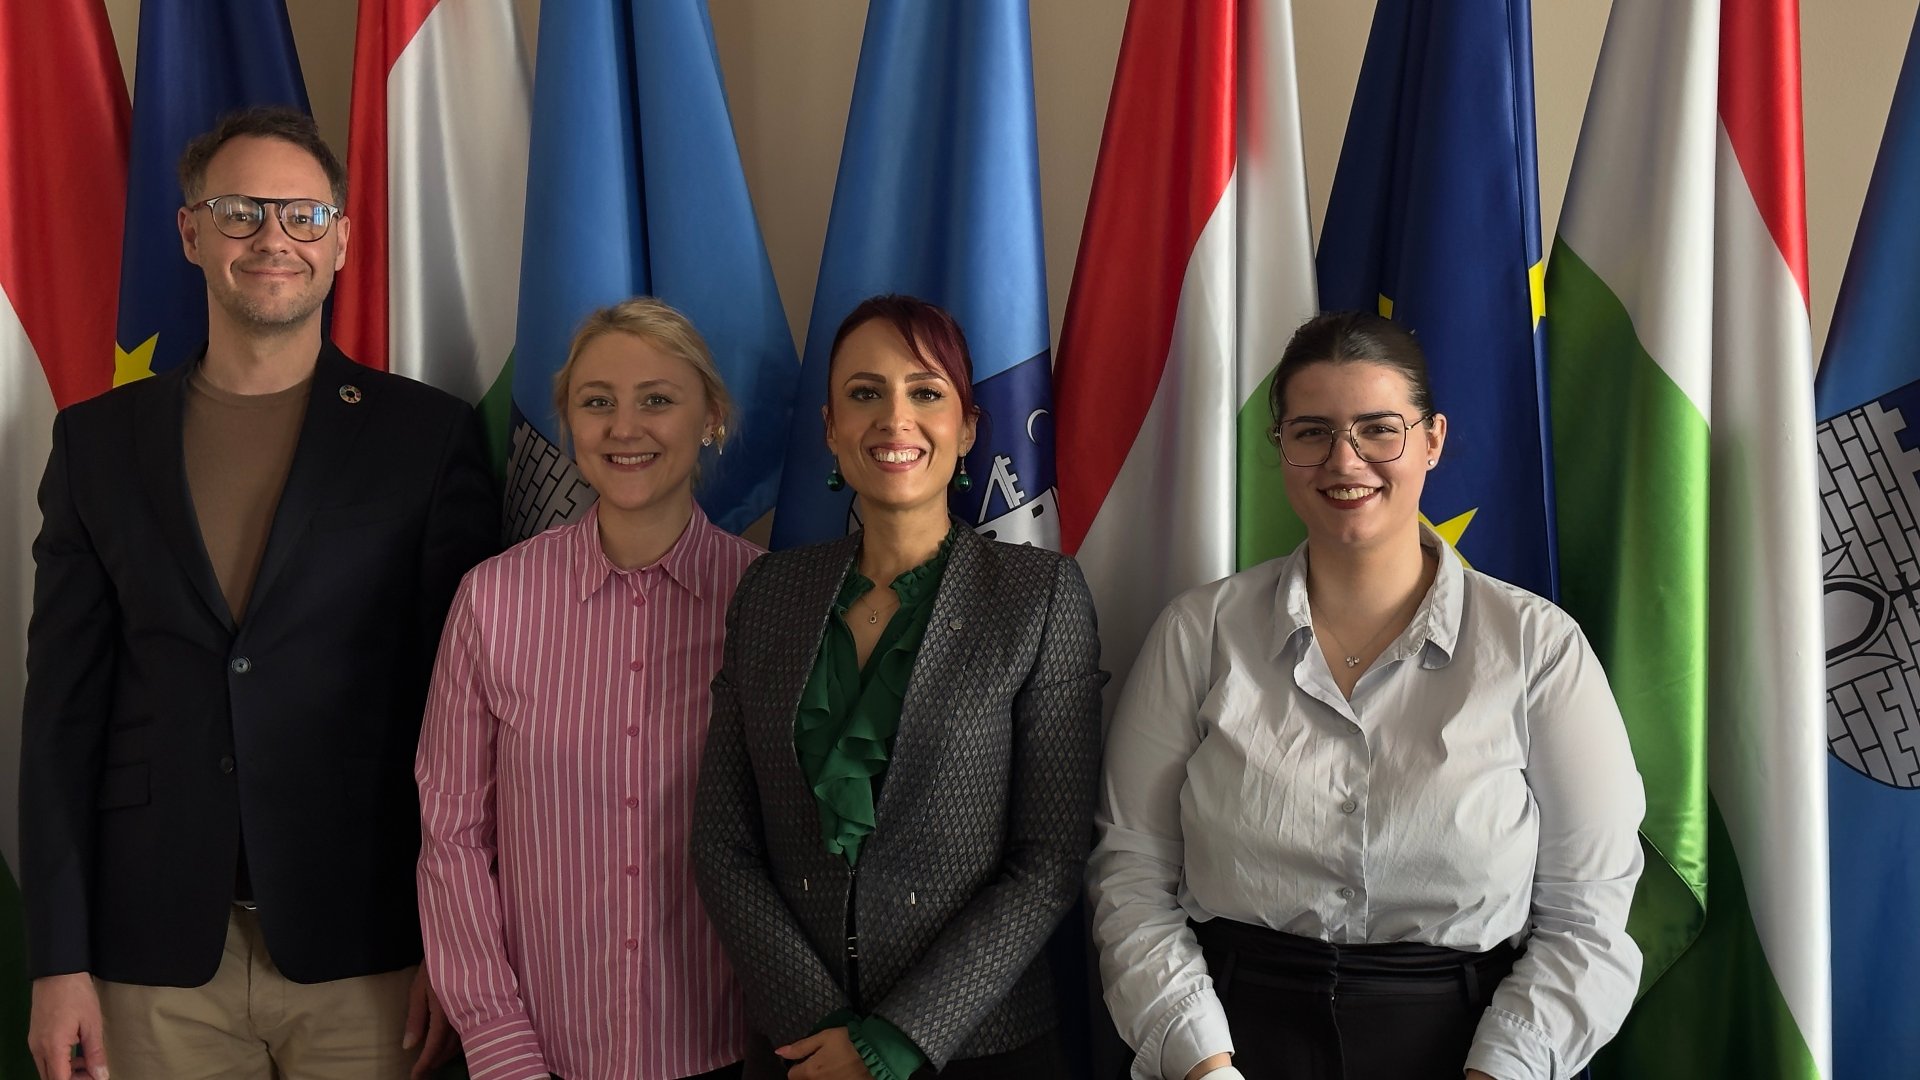 The photo shows three smiling women and a man against a background of several flags - grafika artykułu